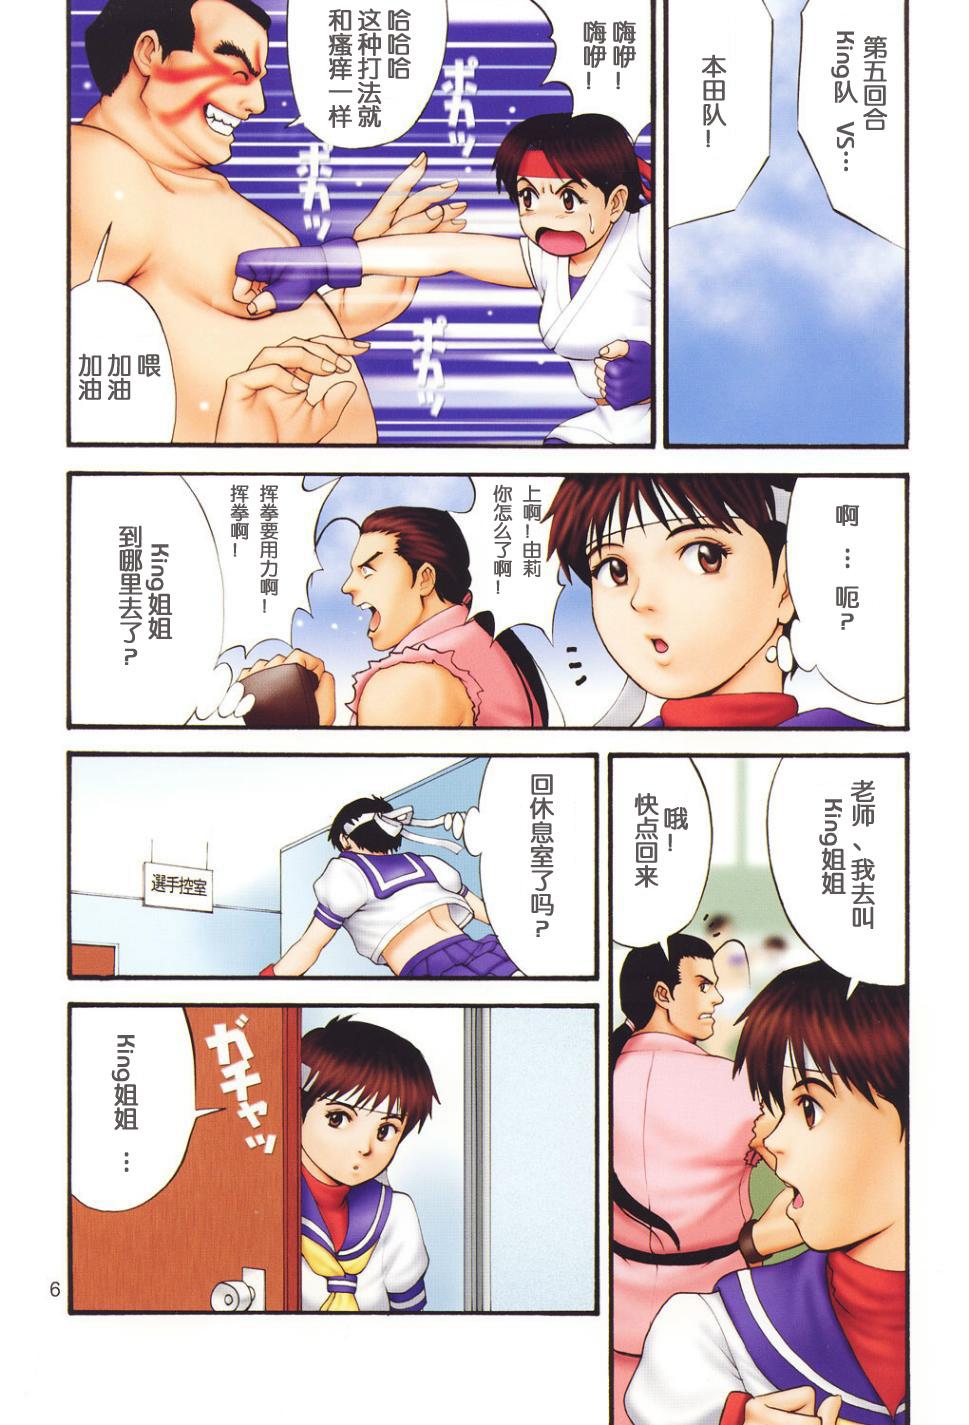 Small The Yuri & Friends Fullcolor 4 SAKURA vs. YURI EDITION - Street fighter King of fighters Young Petite Porn - Page 5